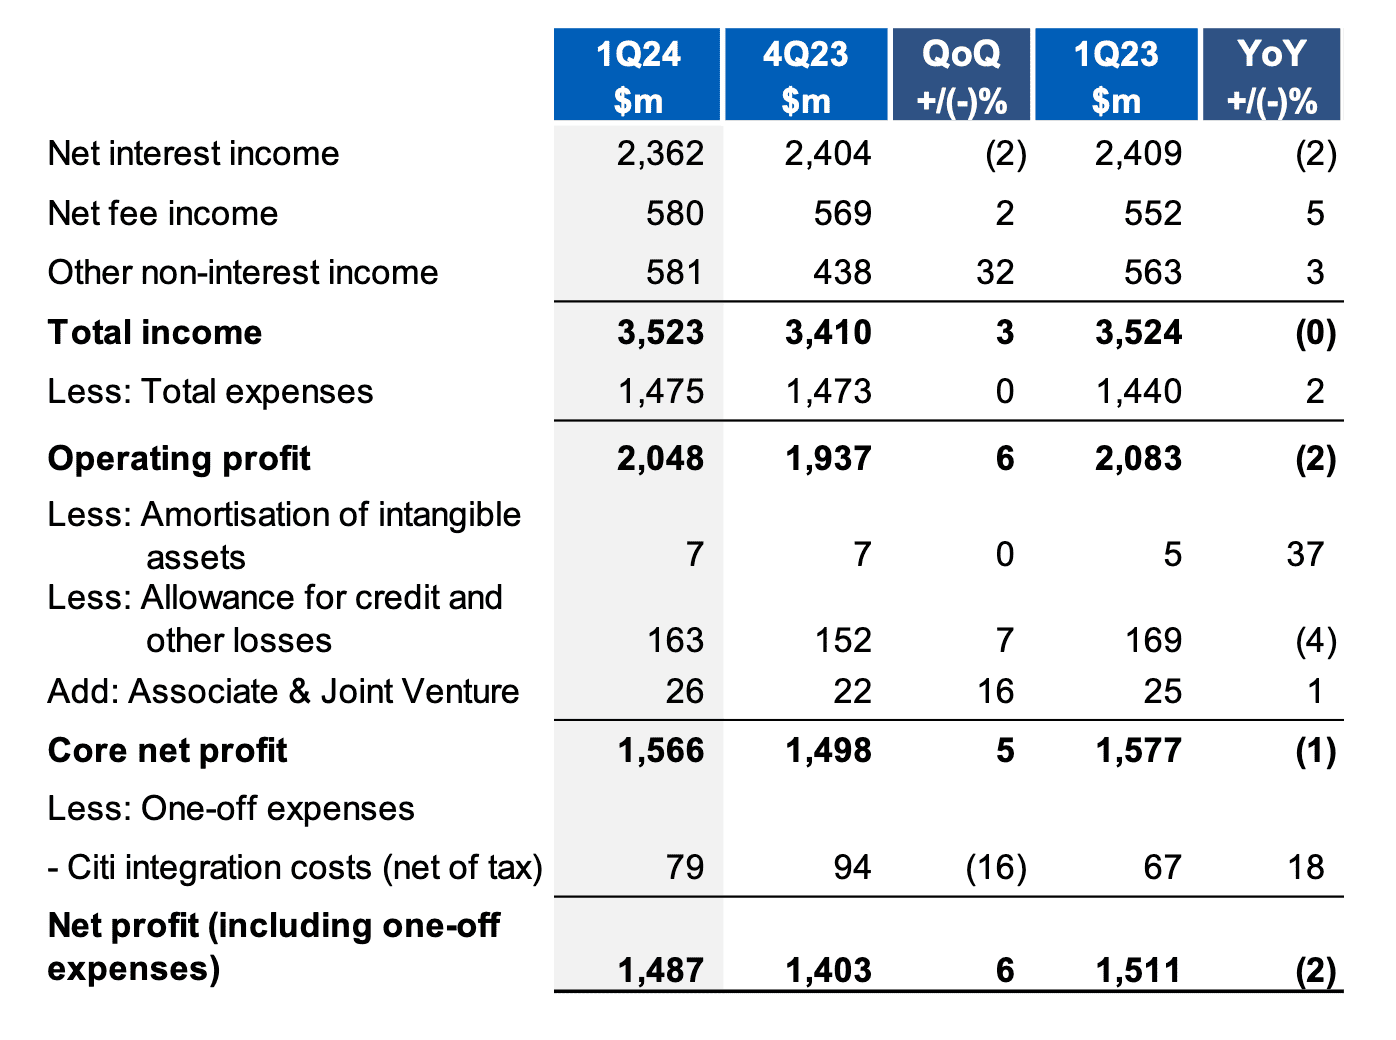 UOB results table